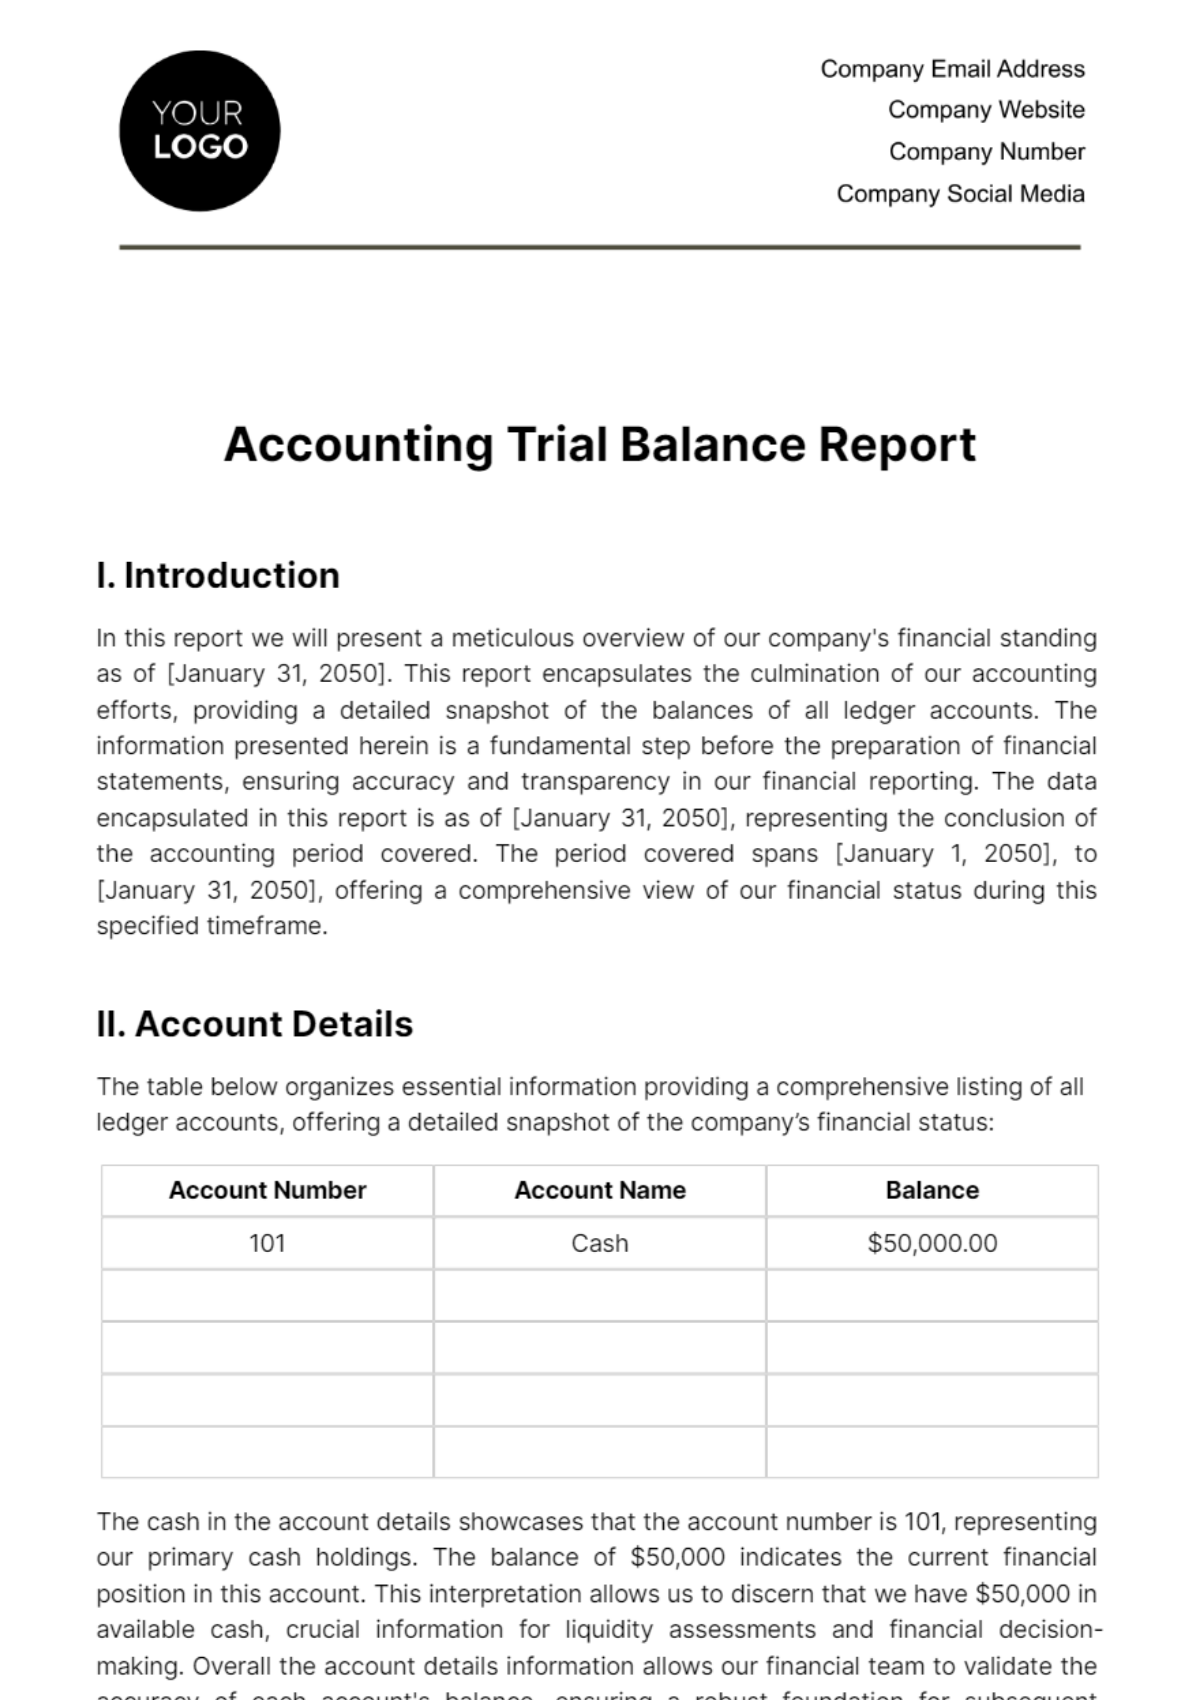 Accounting Trial Balance Report Template